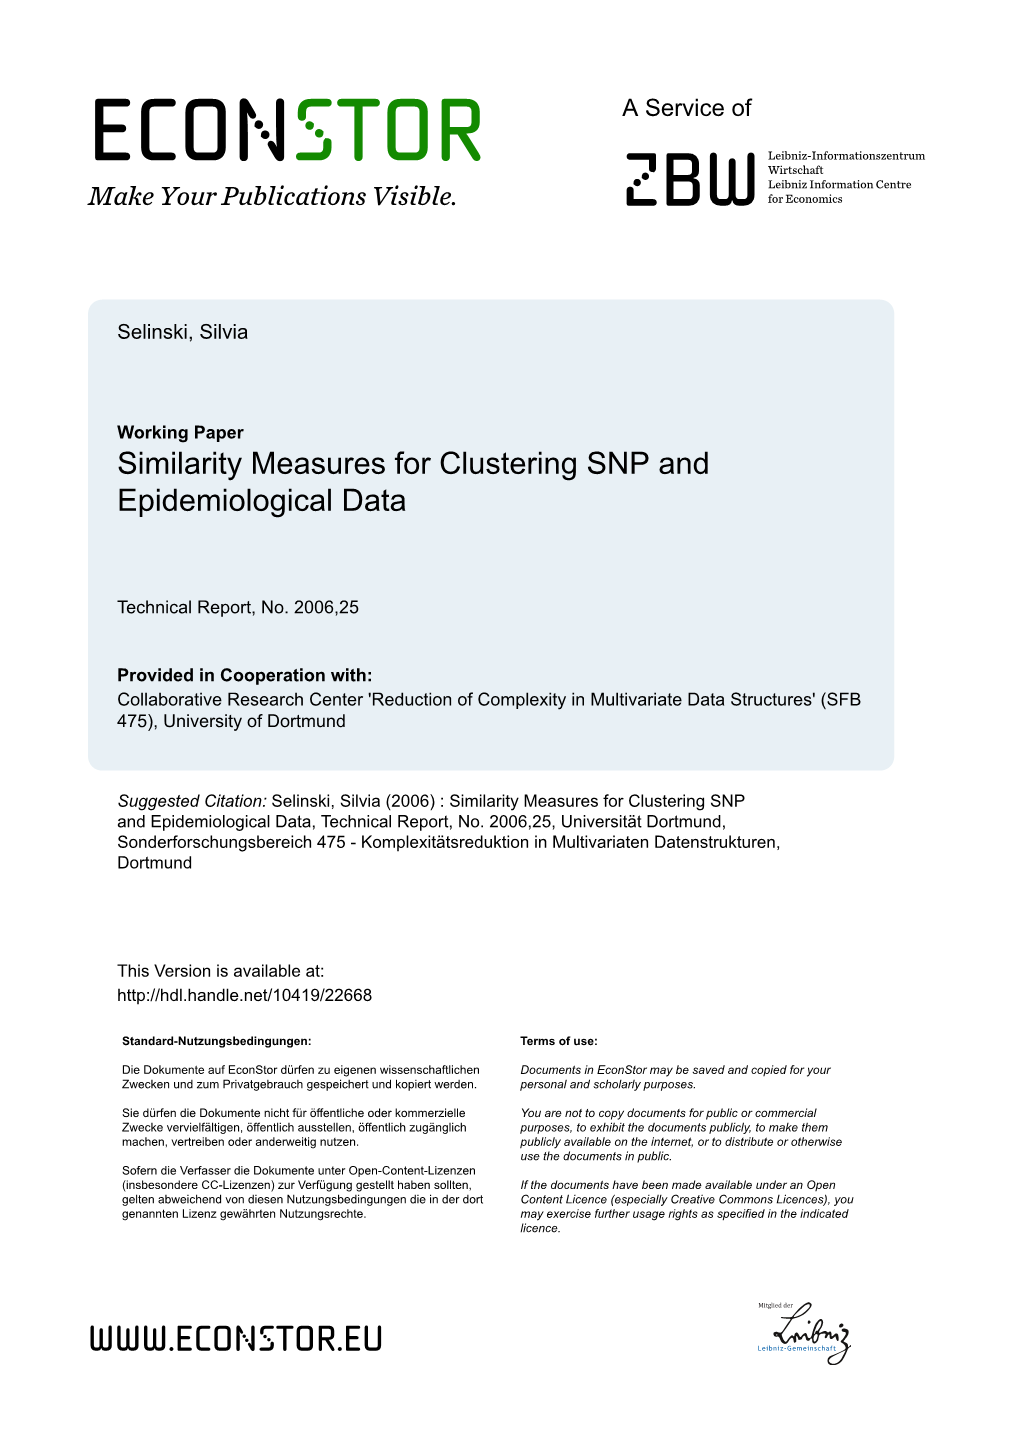 Similarity Measures for Clustering SNP and Epidemiological Data